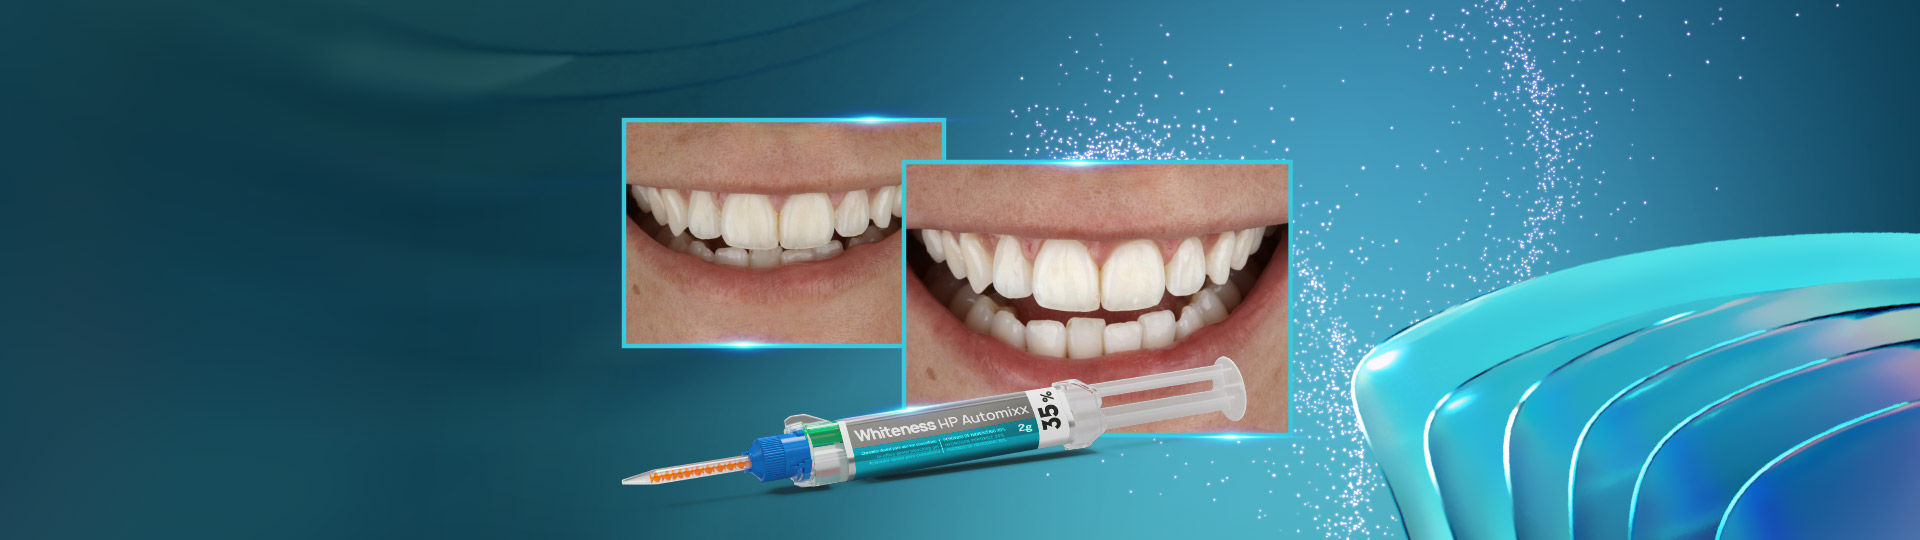 Tooth whitening in the office: a fast and effective alternative for immediate whitening